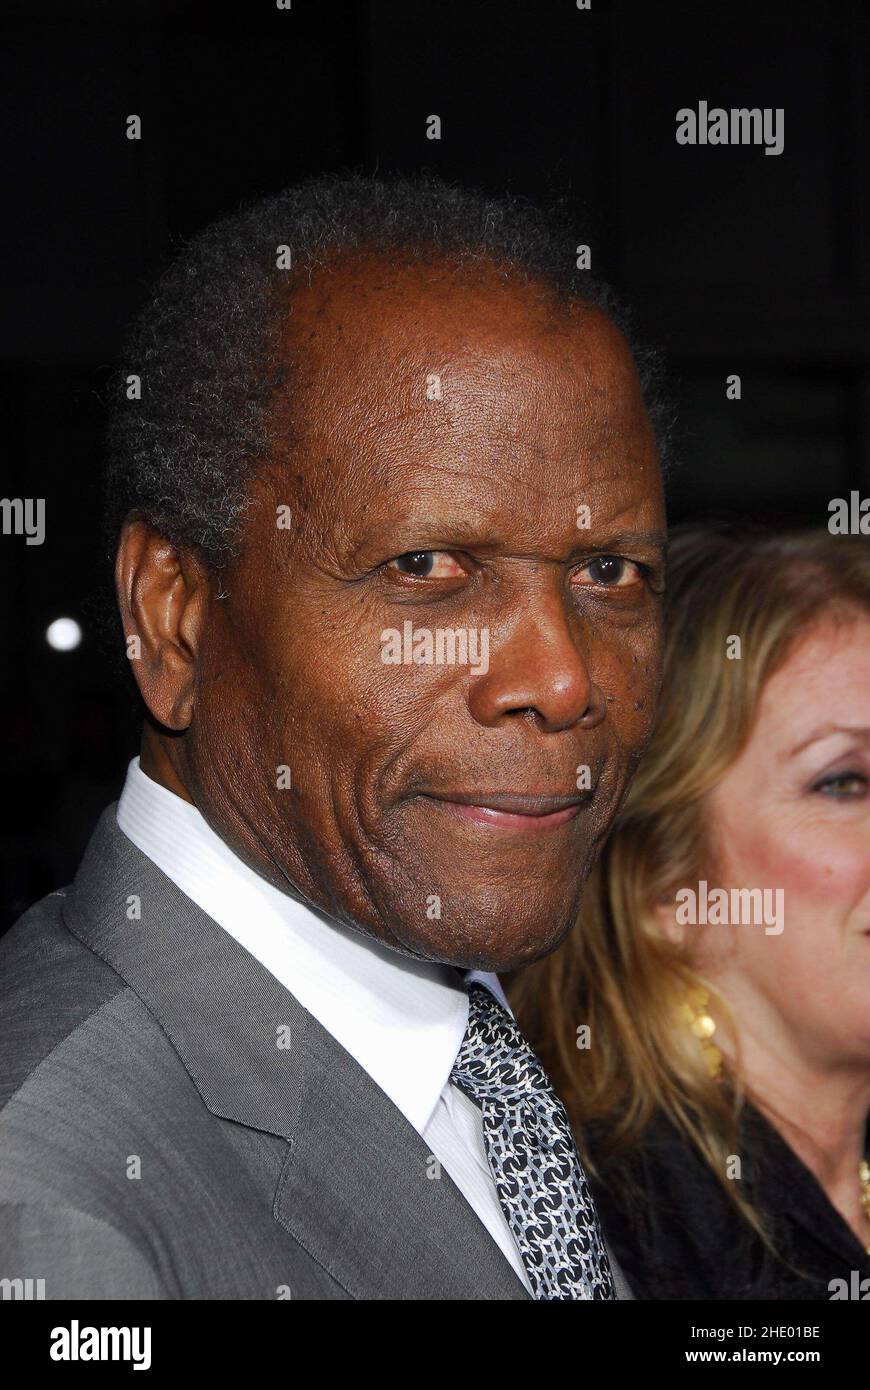 Sidney Poitier. 26 March 2007 - Los Angeles, California. 'Grindhouse' Los Angeles Premiere at the Orpheum Theater. Photo Credit: Giulio Marcocchi/Sipa Press. (') Copyright 2007 by Giulio Marcocchi./grind gm.215/0703270957 Stock Photo